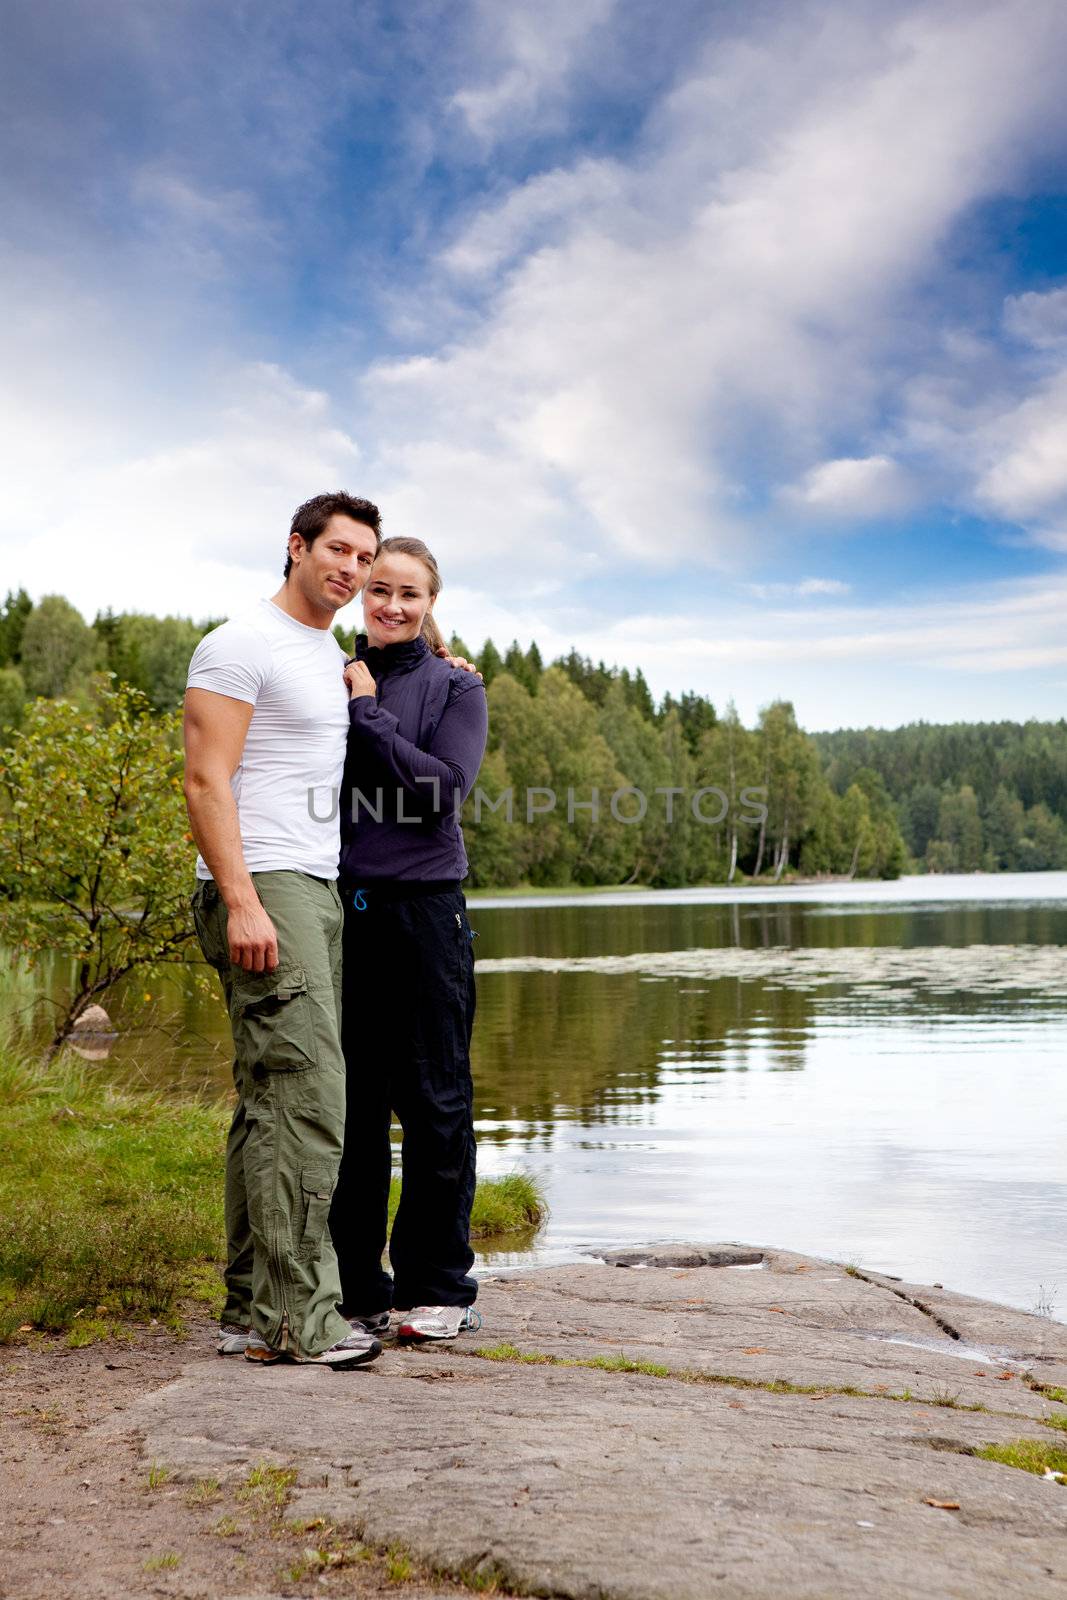 A outdoors couple portrait by a lake and forest